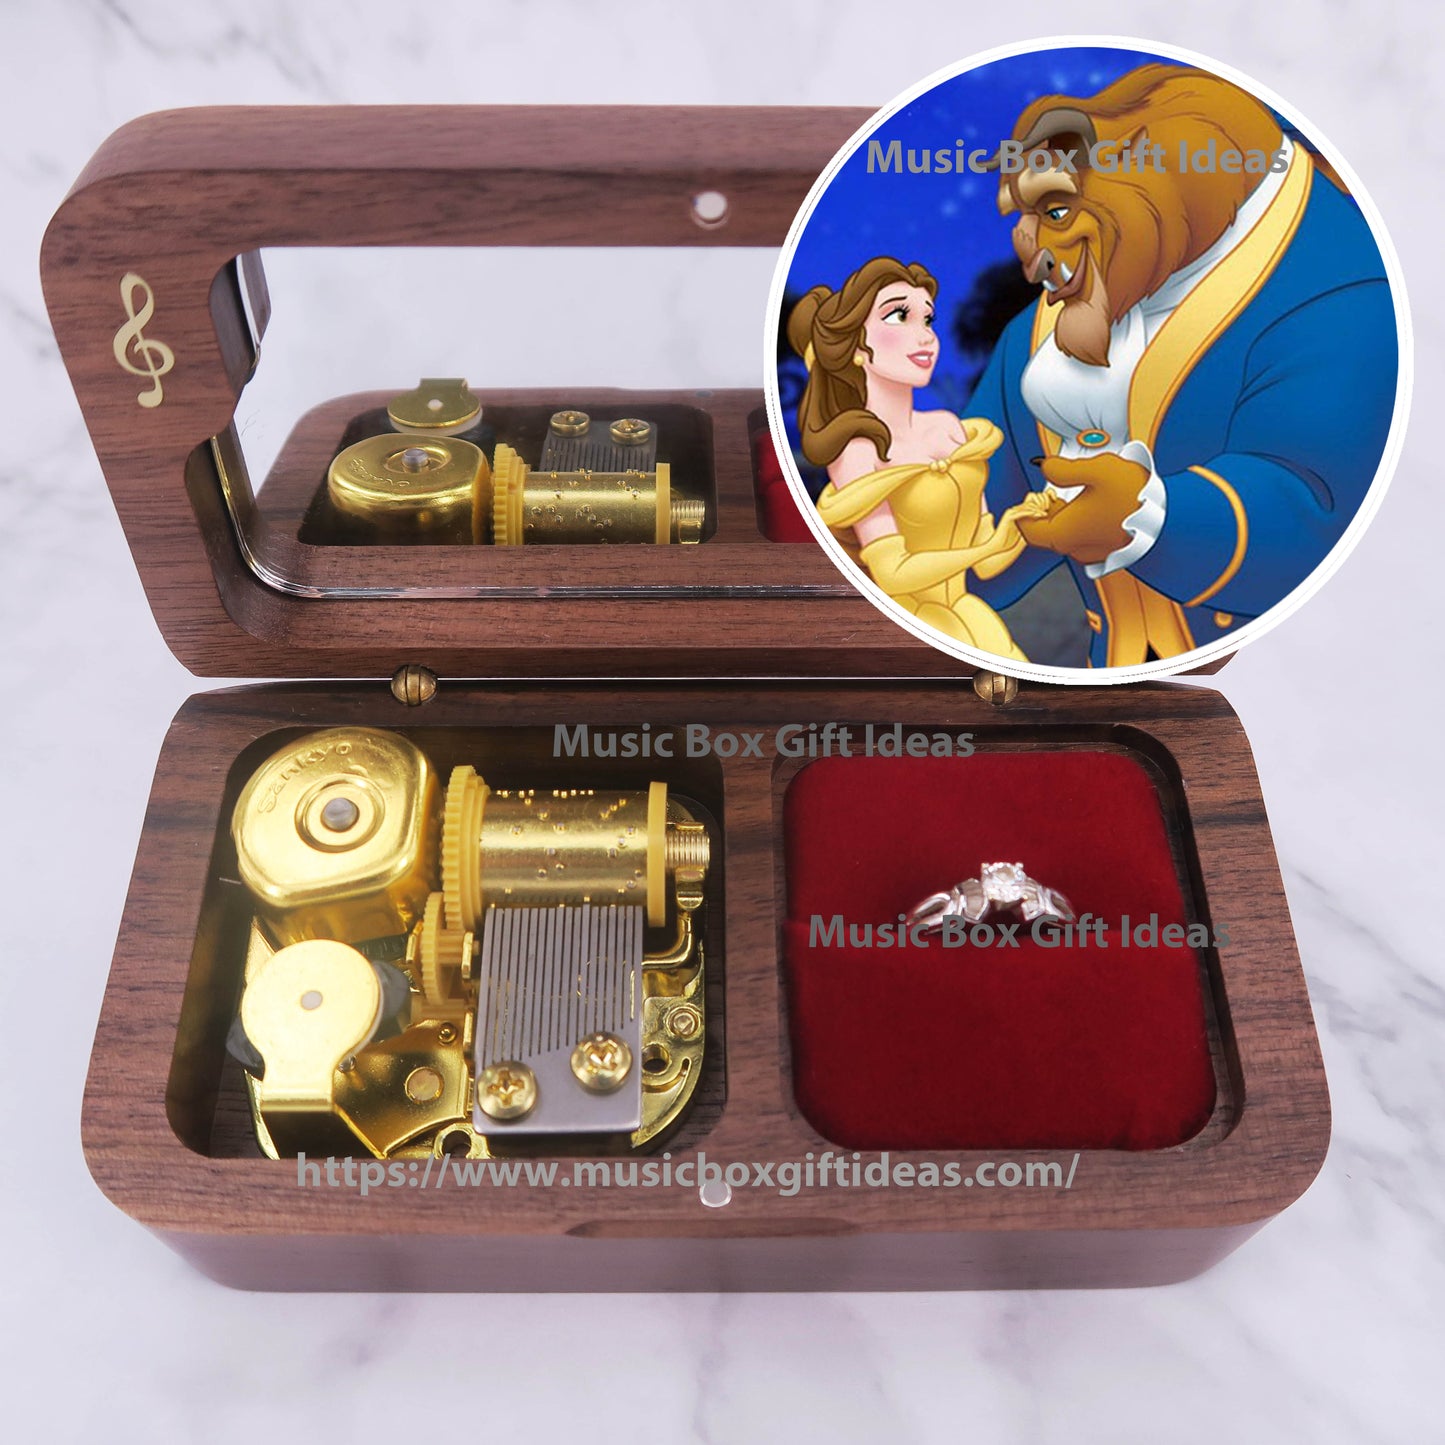 Disney Beauty and the Beast Tale As Old As Time 18-Note Jewelry Music Box Gift (Wooden Clockwork) - Music Box Gift Ideas